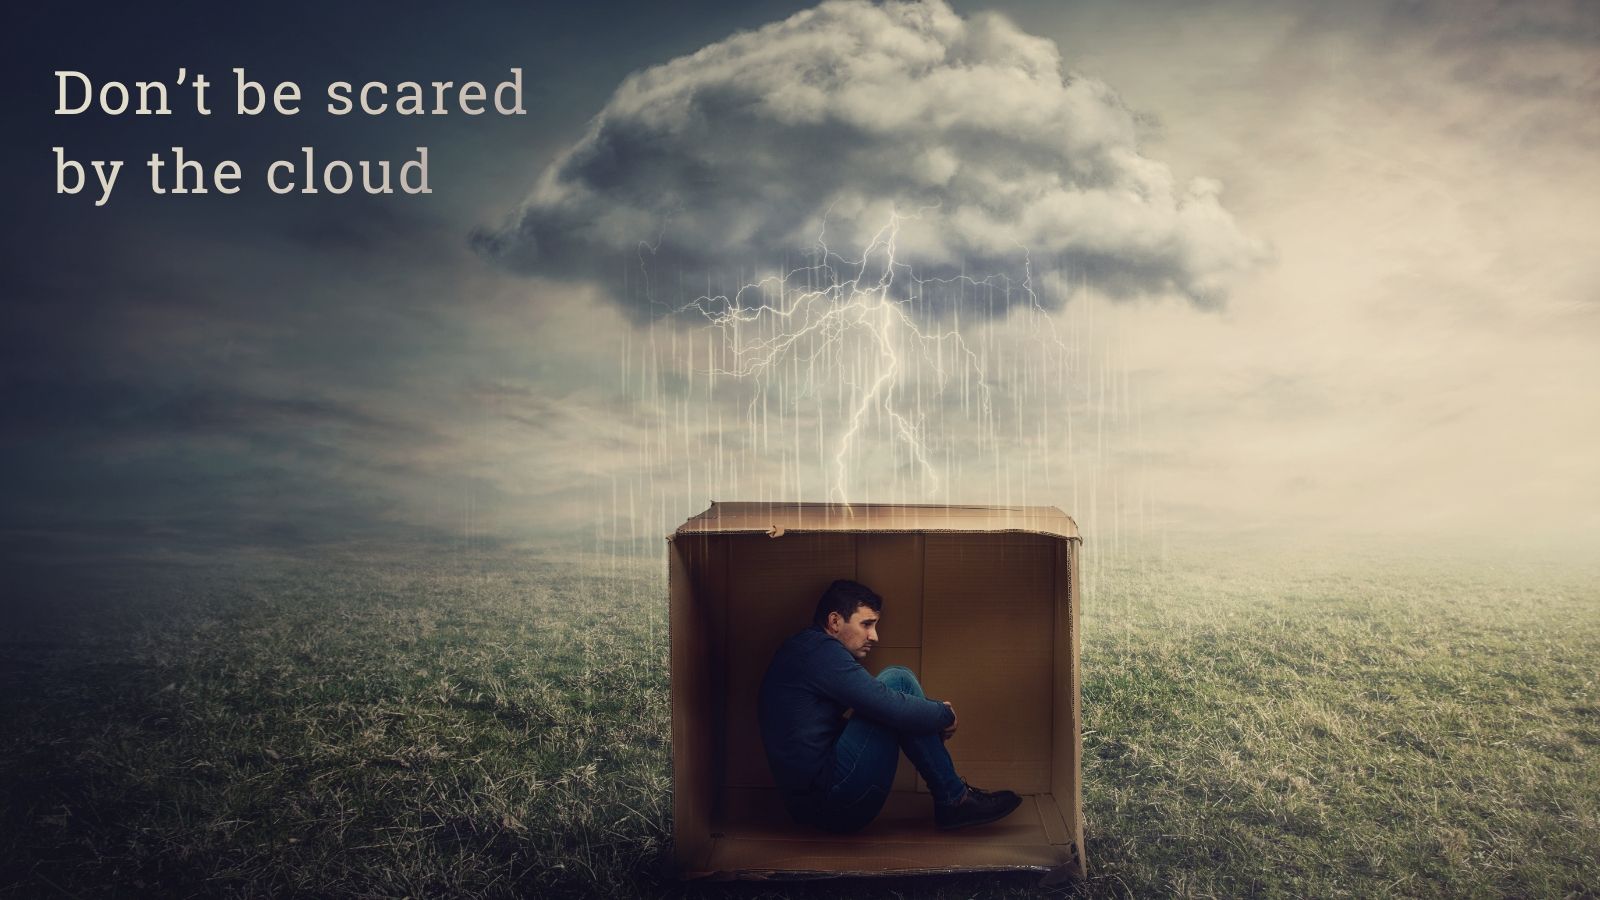 I do not need to go Cloud-Native, do I? The fears of change